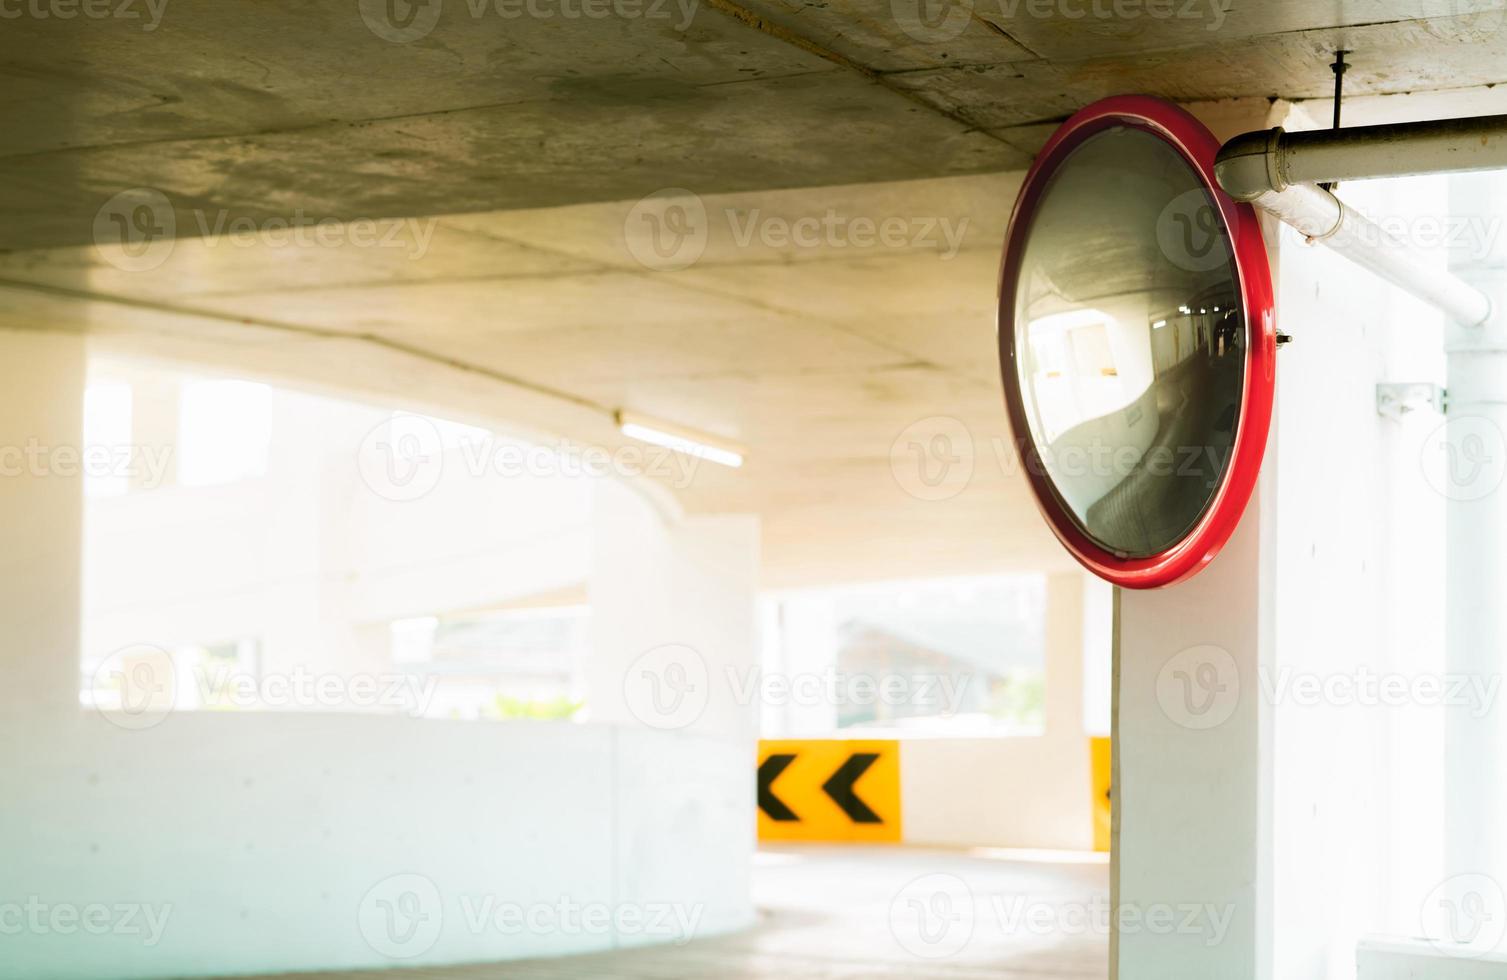 Convex safety mirror at curve of indoor car parking lot to reduce risk of accidents from blind corner or blind spots. Convex circular safety mirror in multi-level parking garage. Indoor traffic convex photo